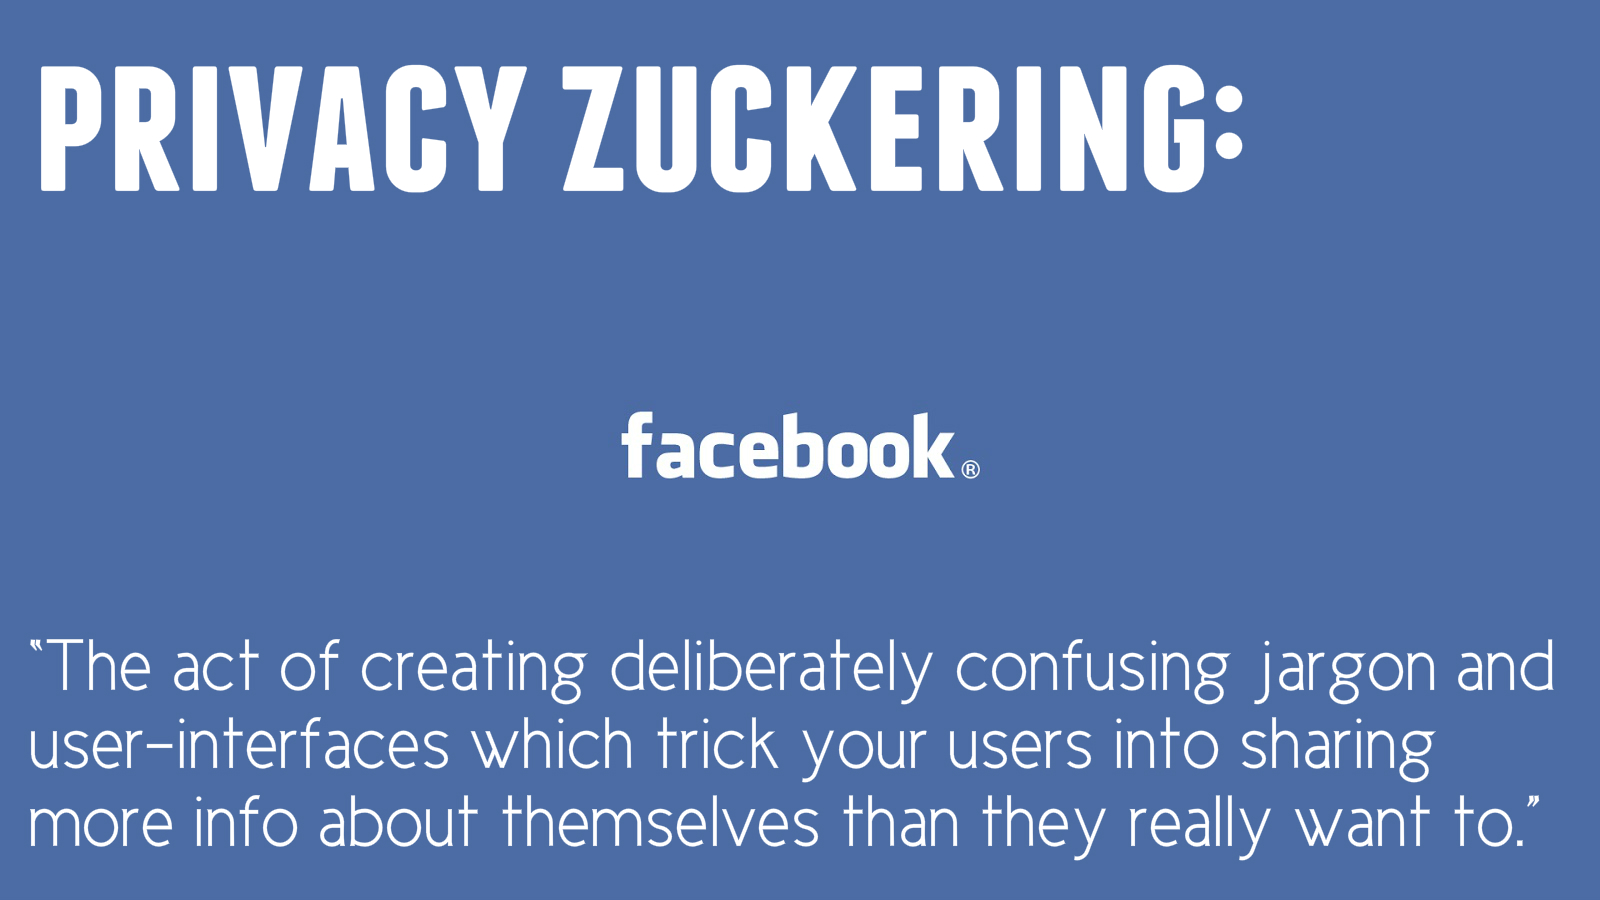 Privacy Zuckering: the act of creating deliberately confusing jargon and user-interfaces which trick your users into sharing more info about themselves than they really want to.